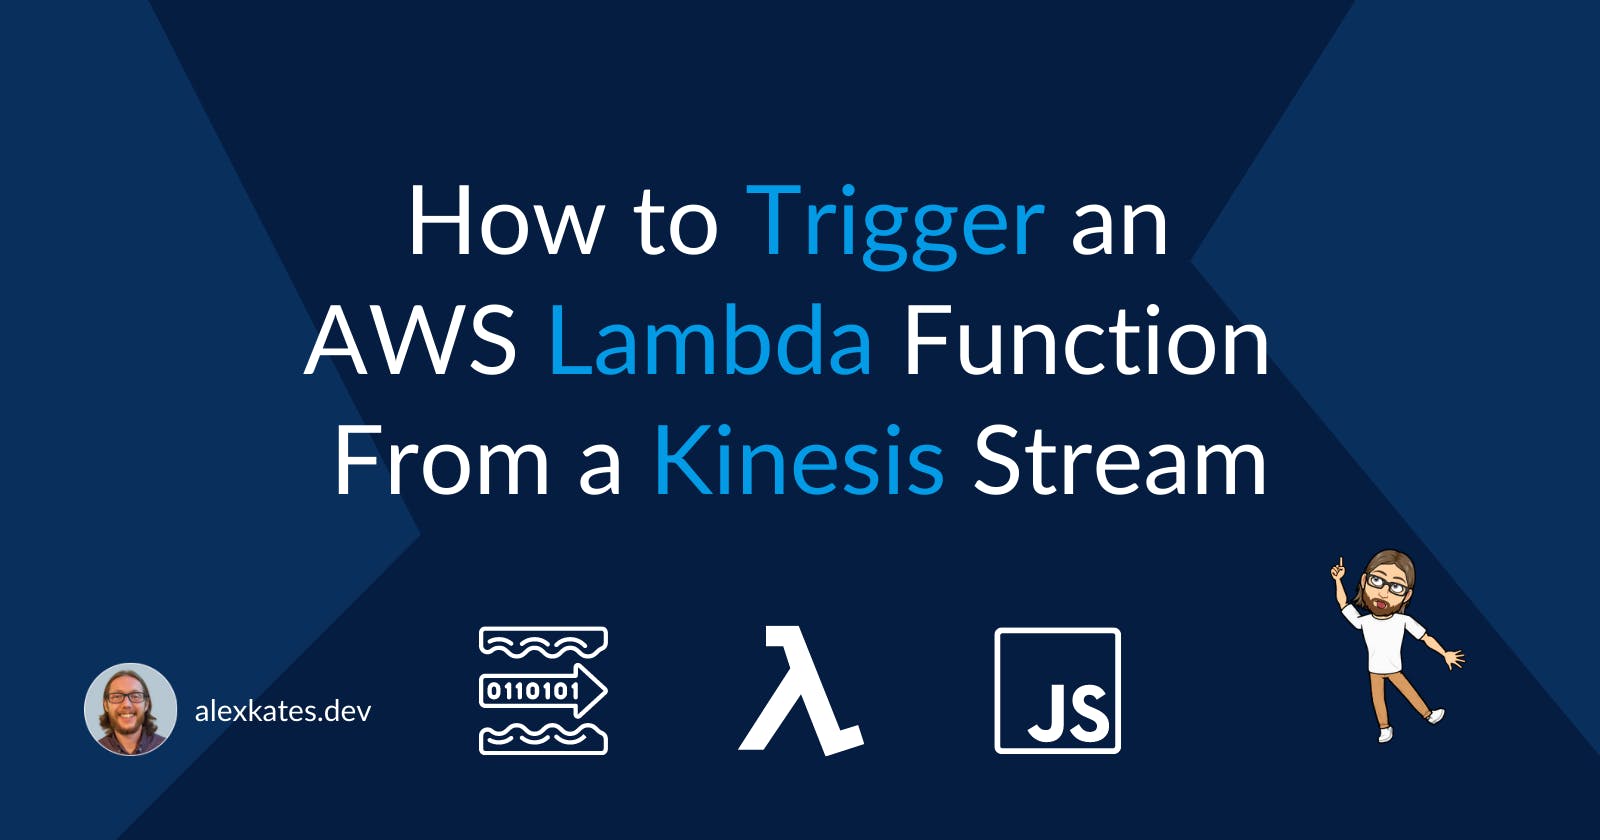 How to Trigger an AWS Lambda Function from a Kinesis Stream